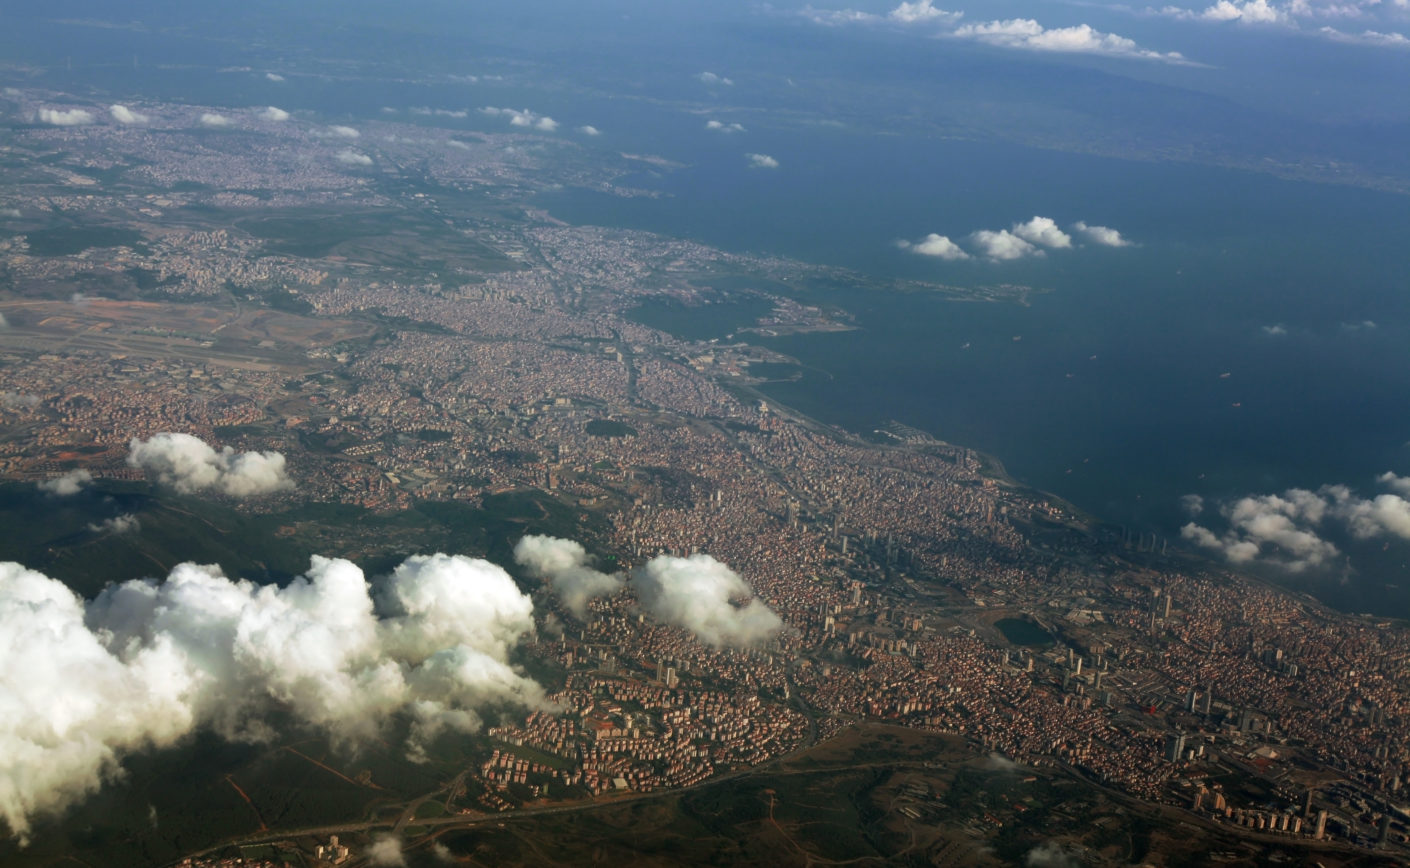 Istanbul under white partial clouds, with over 17 million population through a Bird's Eye View.